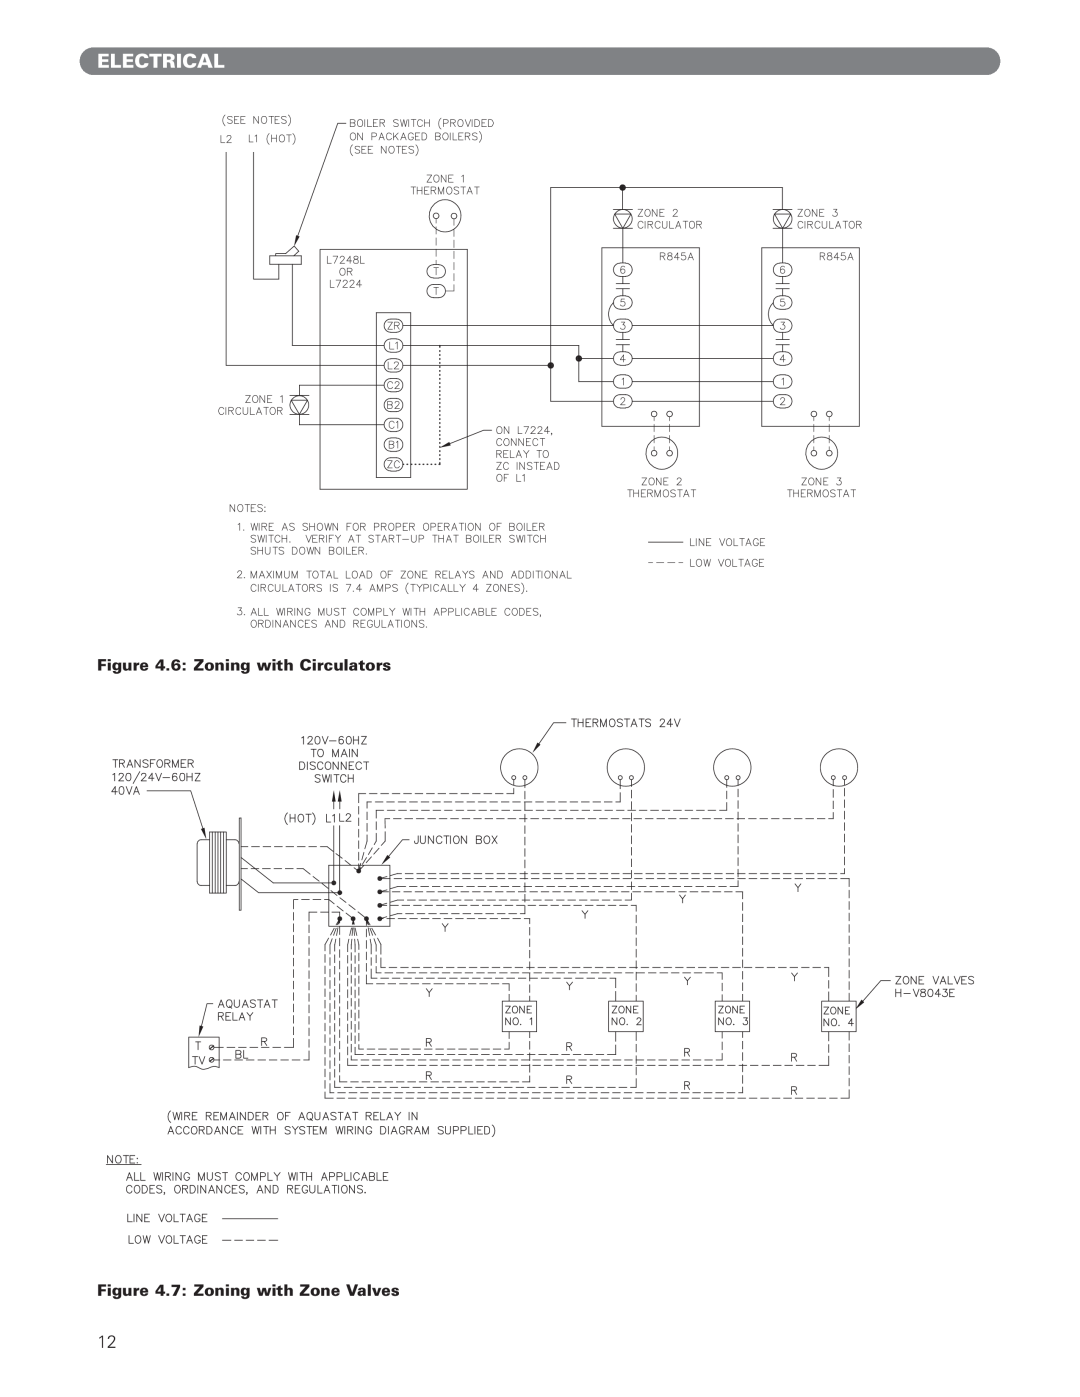 PB Heat WV Series, WBV Series manual Electrical, 6: Zoning with Circulators, 7: Zoning with Zone Valves 